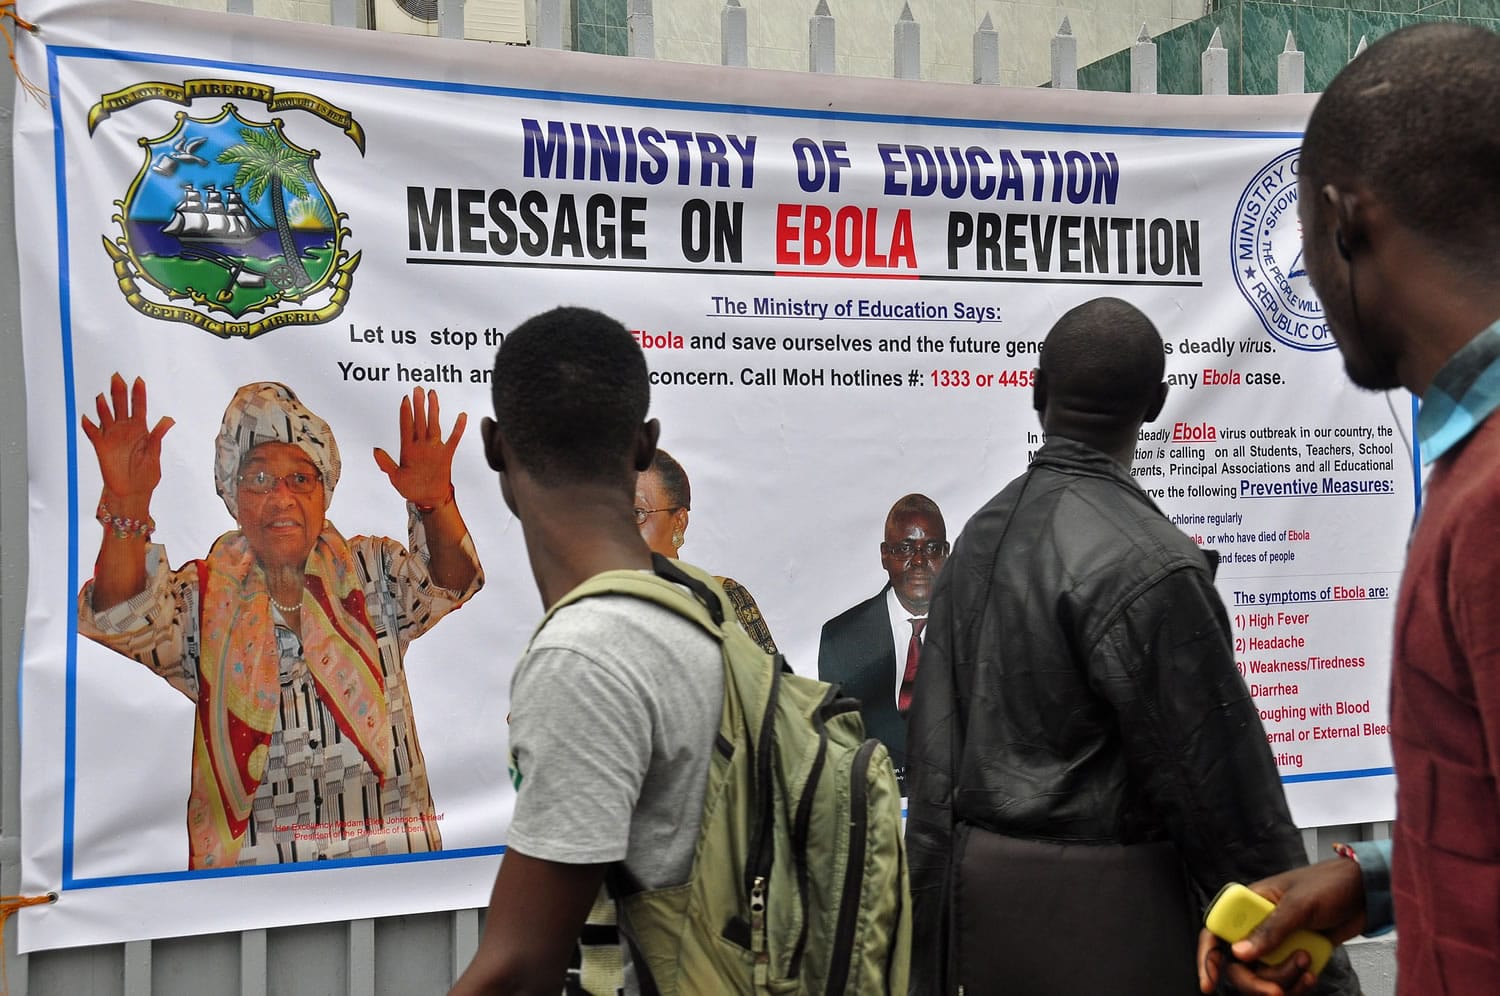 The image of Liberia President Ellen Johnson Sirleaf, left, appears on a banner Friday warning people about the Ebola virus in the city of Monrovia, Liberia. Over the decades, Ebola cases have been confirmed in 10 African countries, including Congo where the disease was first reported in 1976.